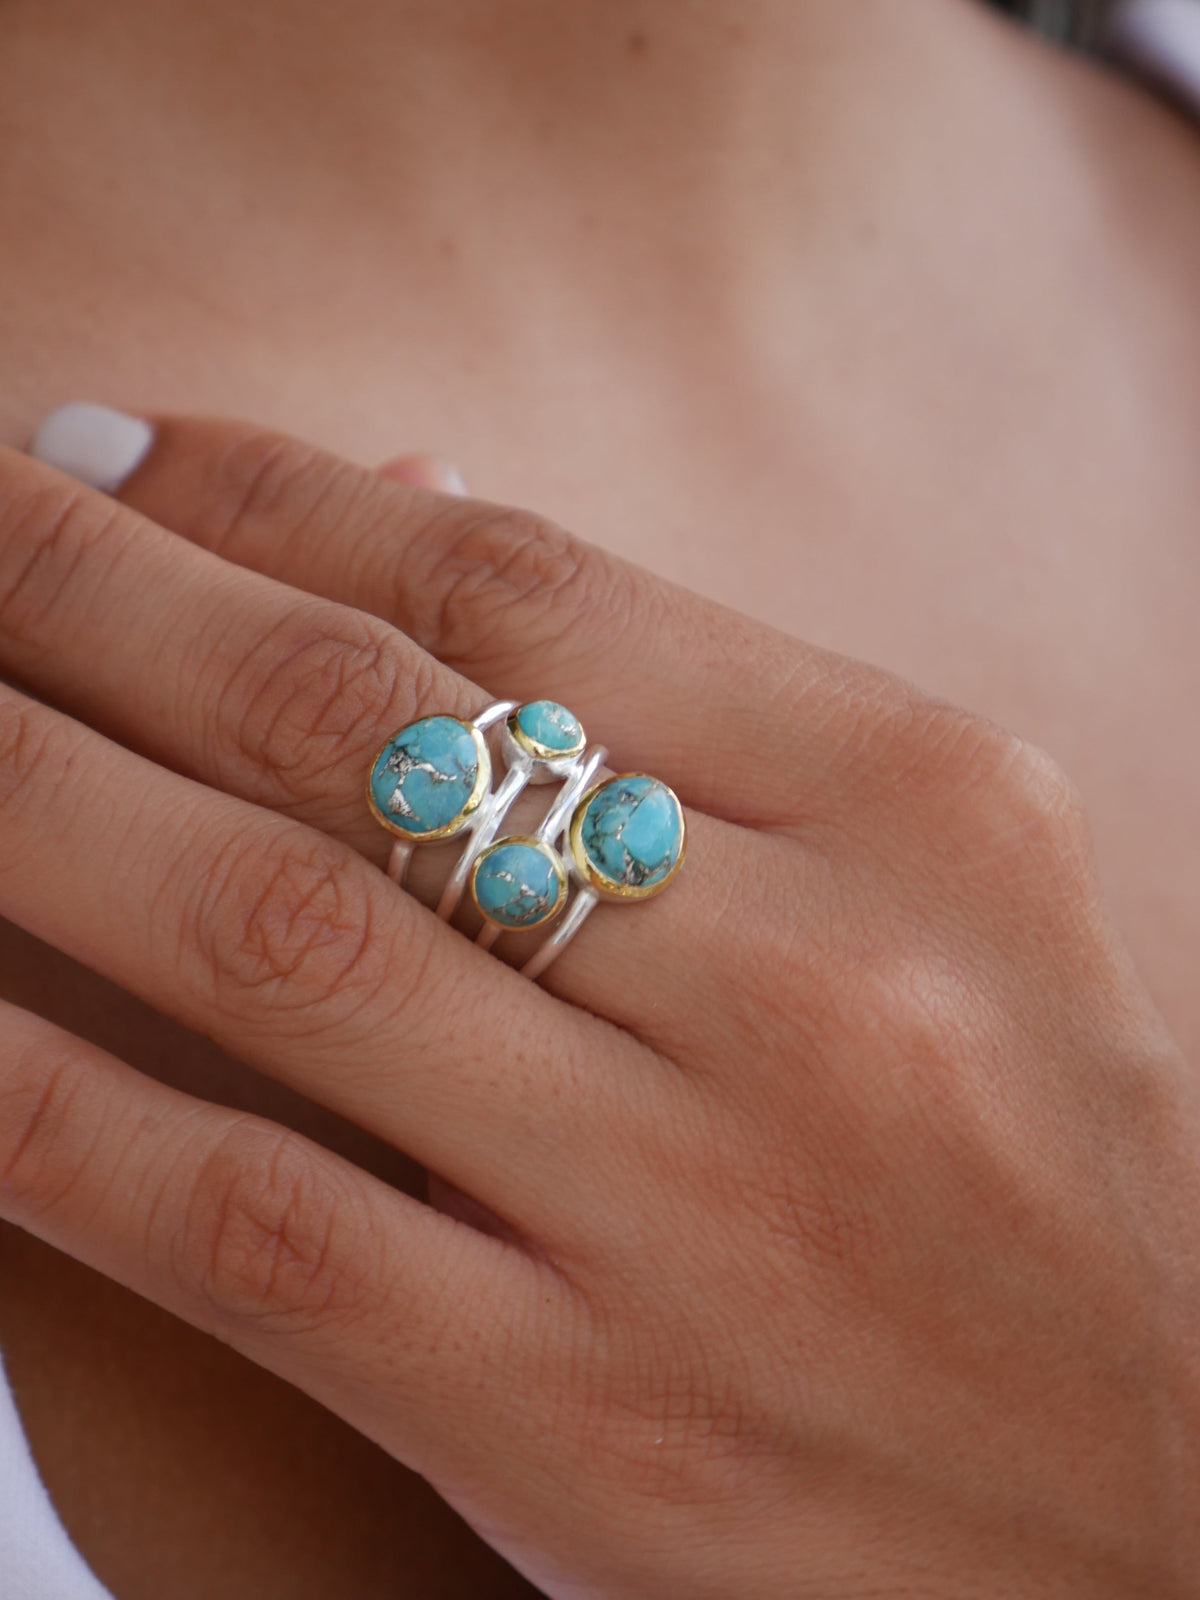 rings, silver, turquoise, jewelry, accessories, fashion jewelry, trending on instagram, trending on tiktok, fine jewelry, statement rings, statement rings, natural stone rings, handmade jewelry, designe rings, luxury rings, fine jewelry, cool rings, casual rings, rings that wont turn green with water, nice jewelry, gift ideas, anniversary gifts, graduation gifts, birthday gifts, Kesley Jewelry